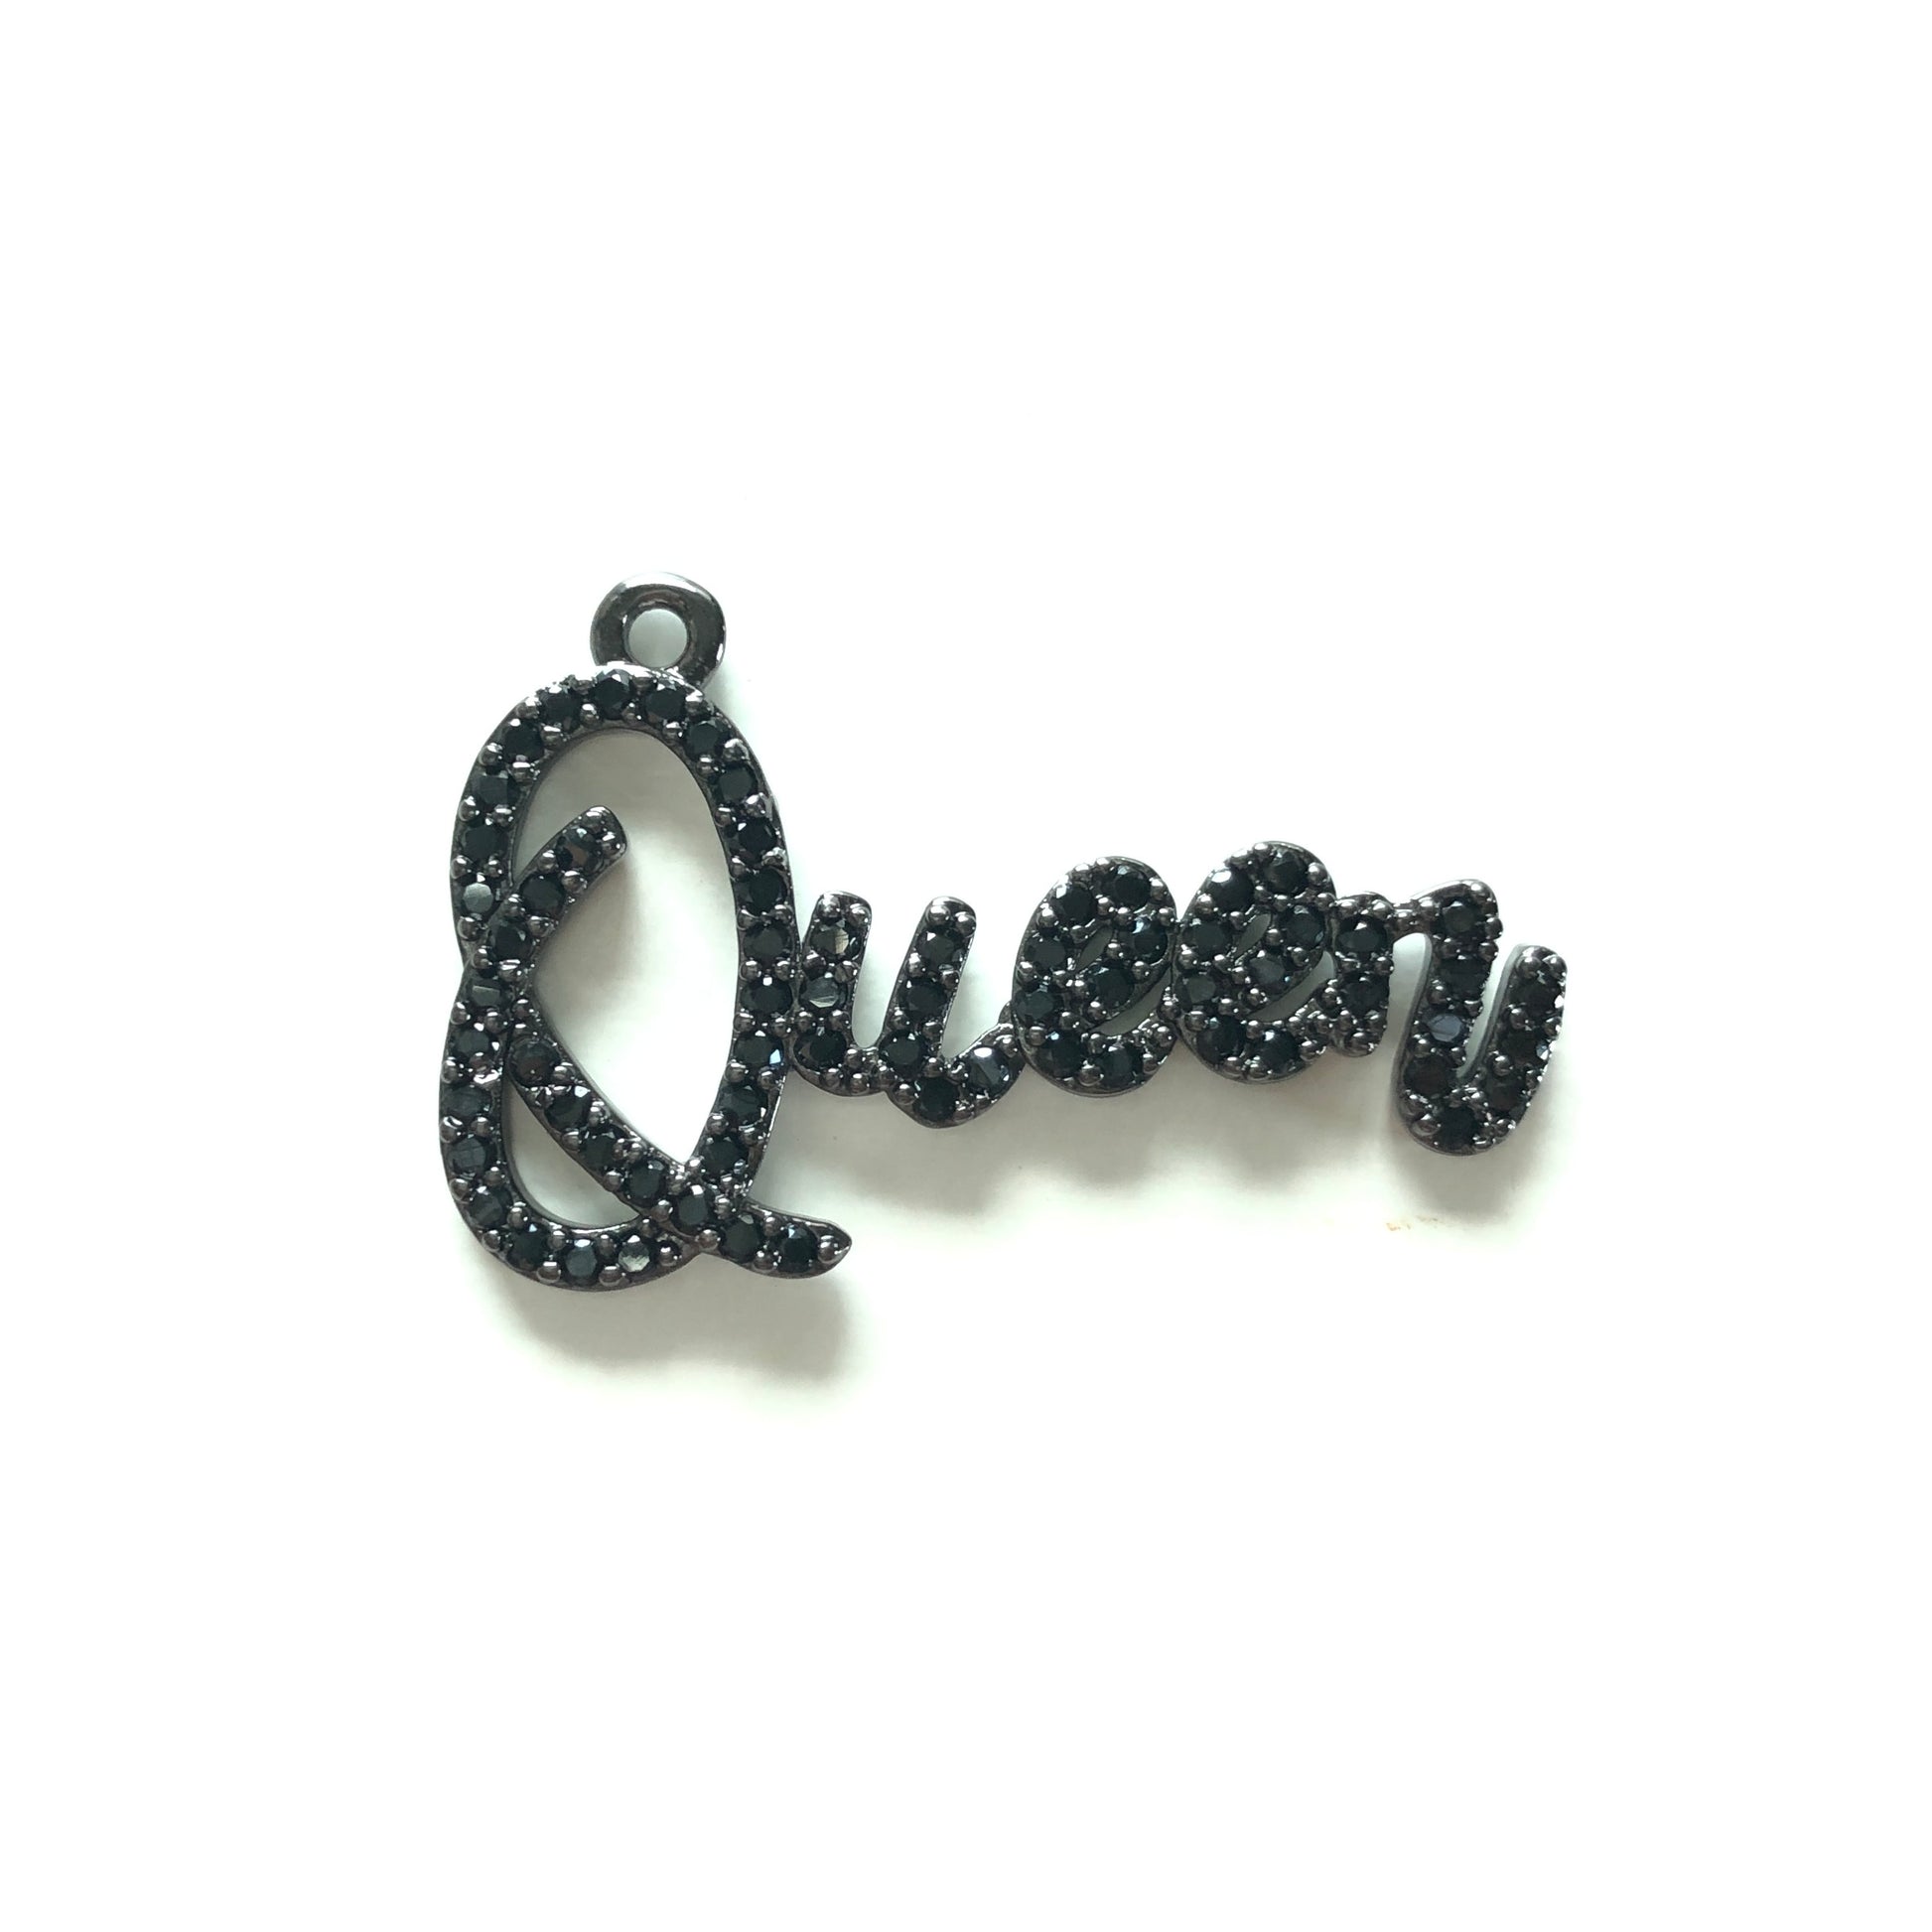 10pcs/lot 34*22.5mm CZ Paved Queen Charms Black on Black CZ Paved Charms Queen Charms Words & Quotes Charms Beads Beyond